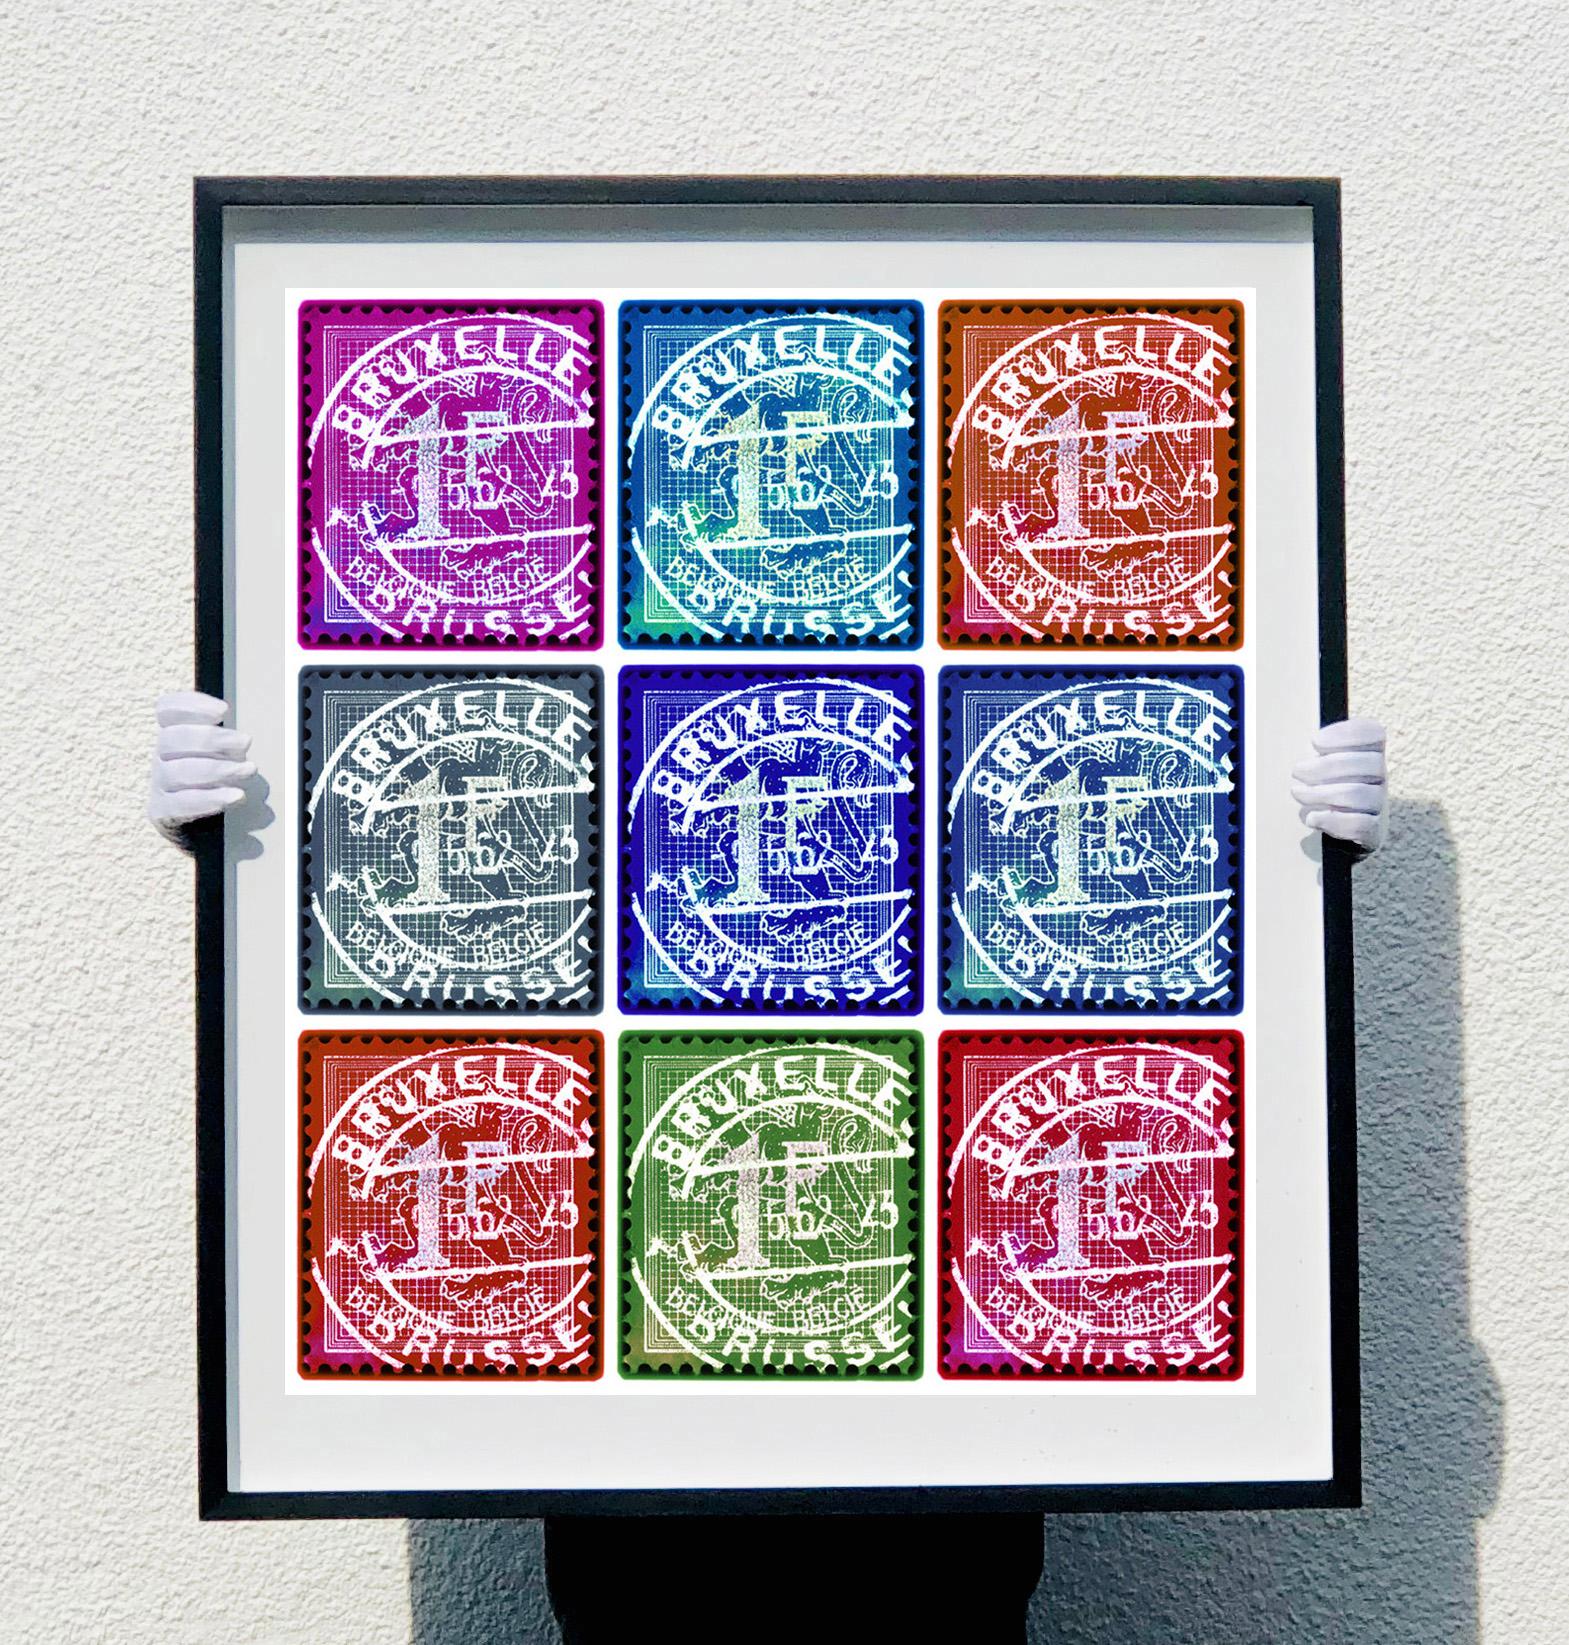 Stamp Collection, Lion of Flanders (Multi-Color Mosaic Brussels Stamps)  - Print by Heidler & Heeps